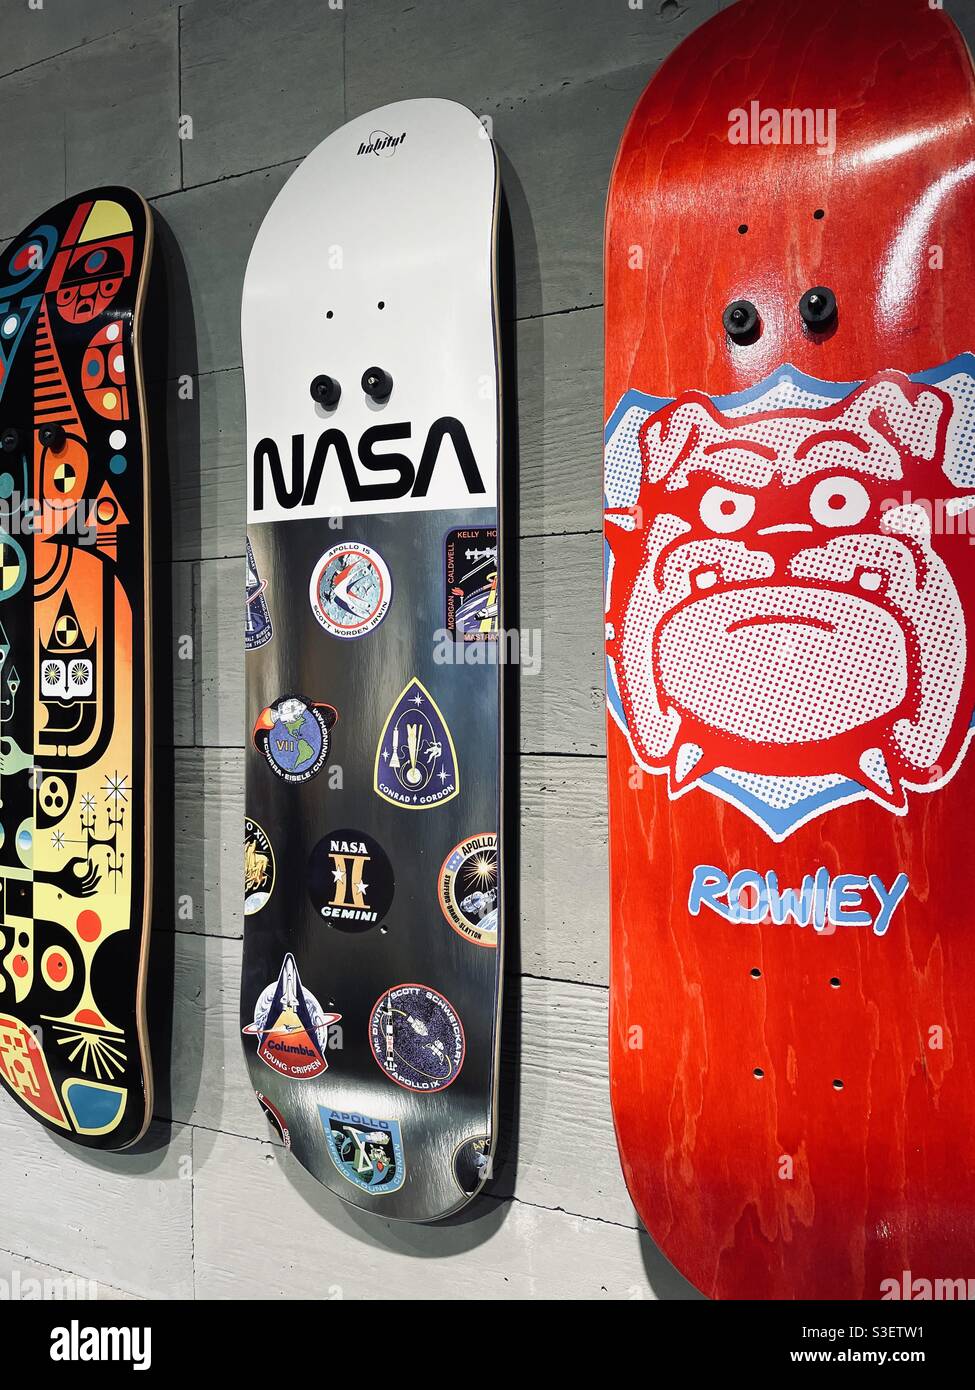 ophøre Bebrejde Peck Skateboards on display at vans off-the-wall store, 5th Avenue, NYC, USA  Stock Photo - Alamy